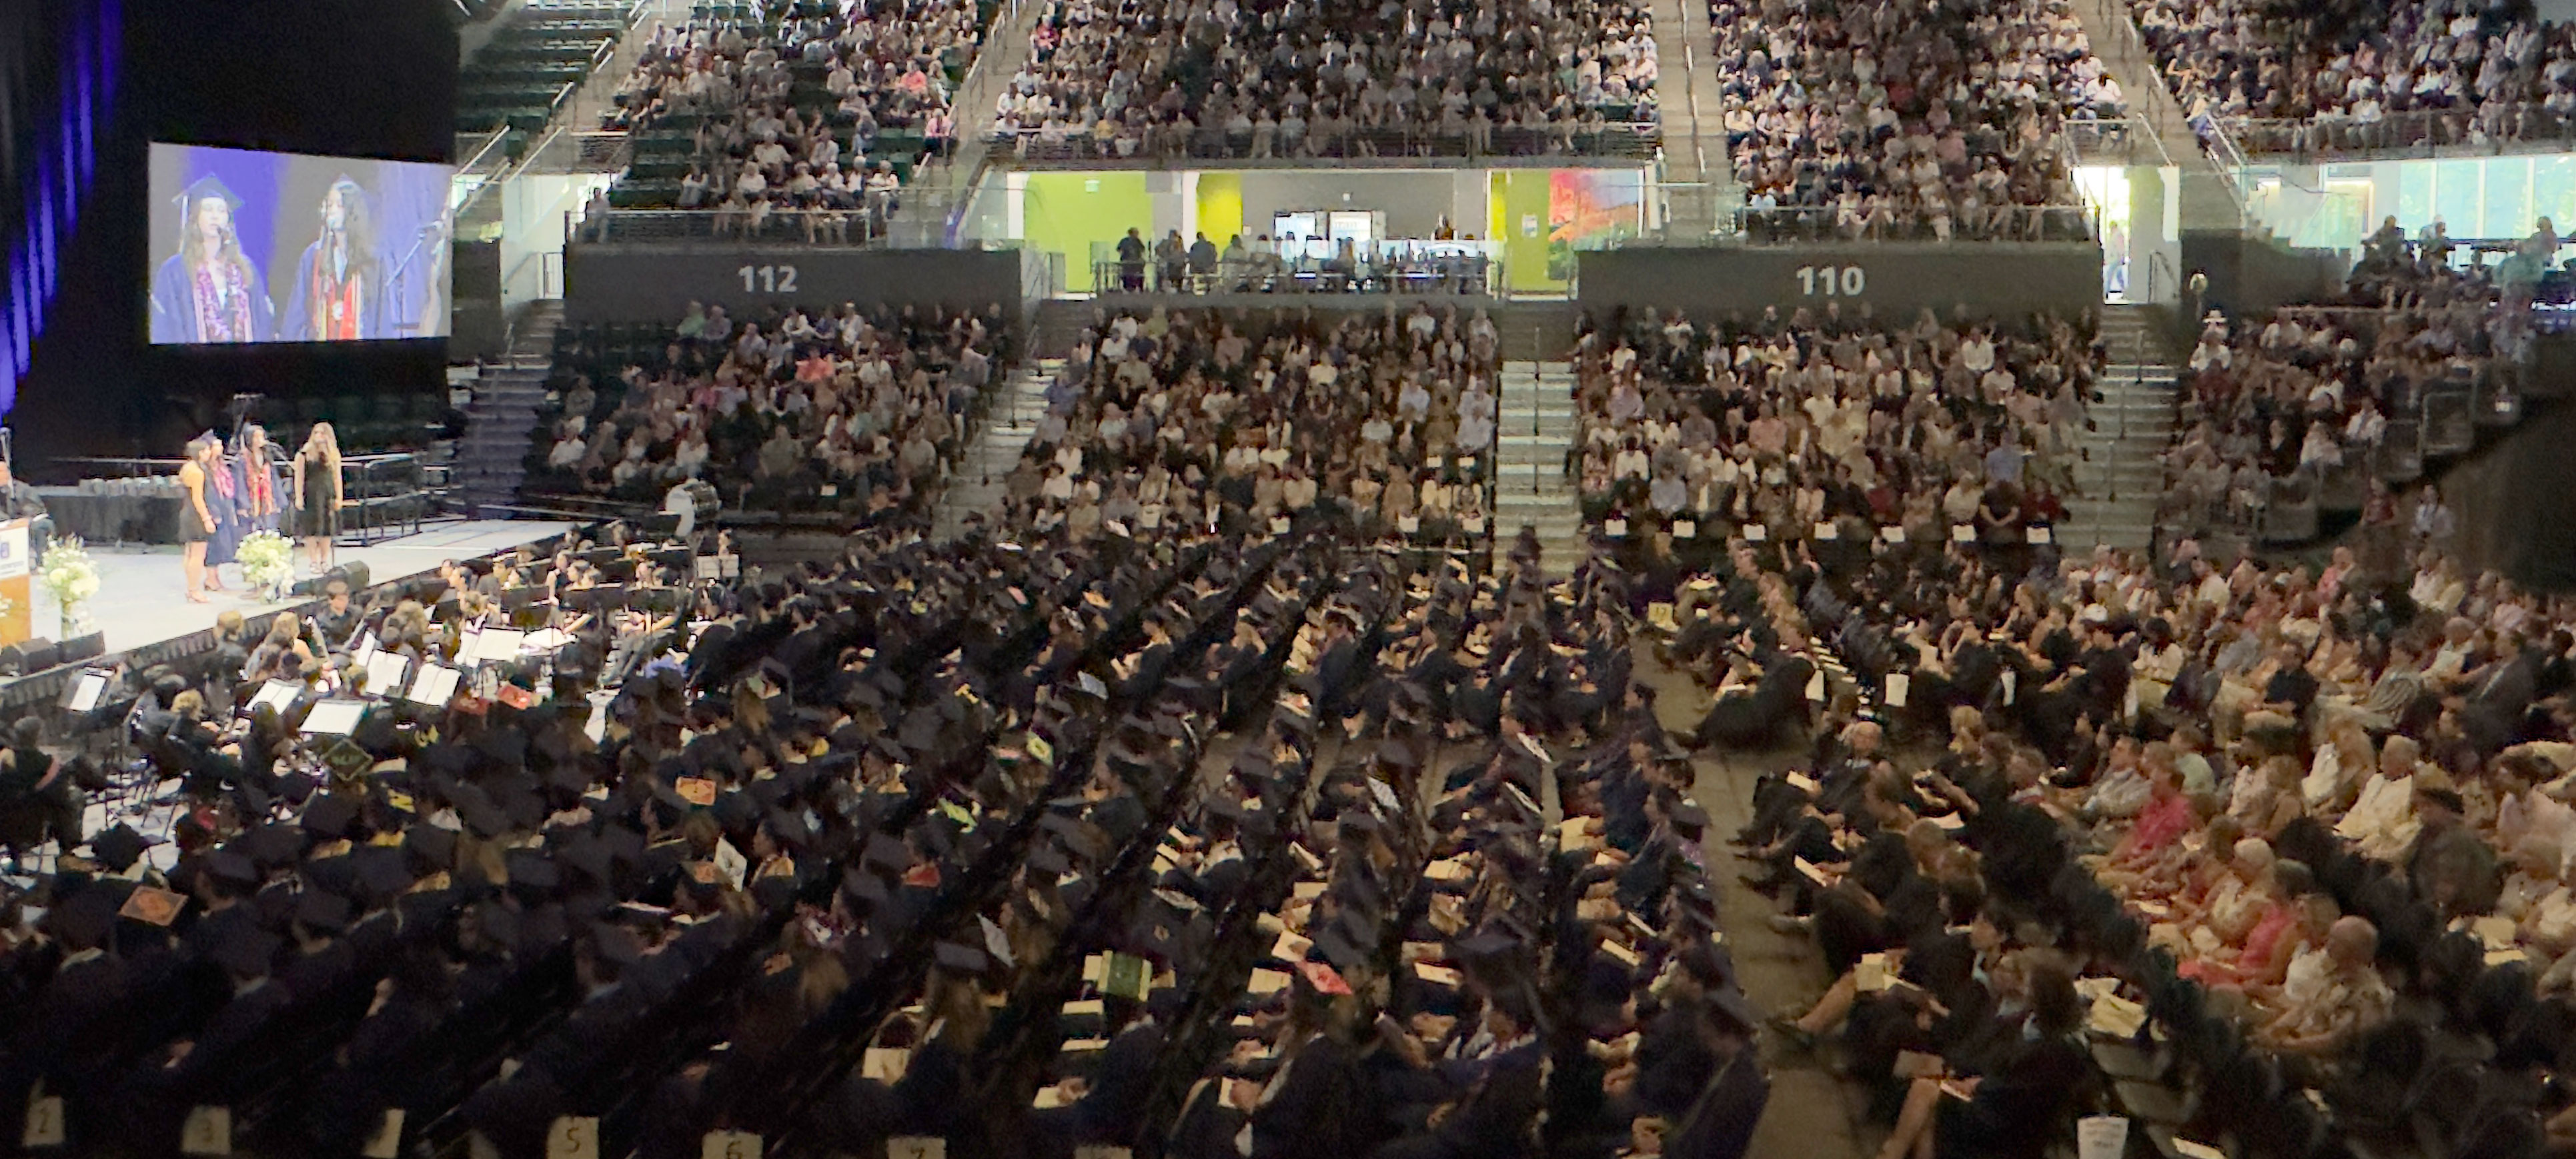 Attendees take part in a commencement ceremony in the Viking Pavilion Arena.